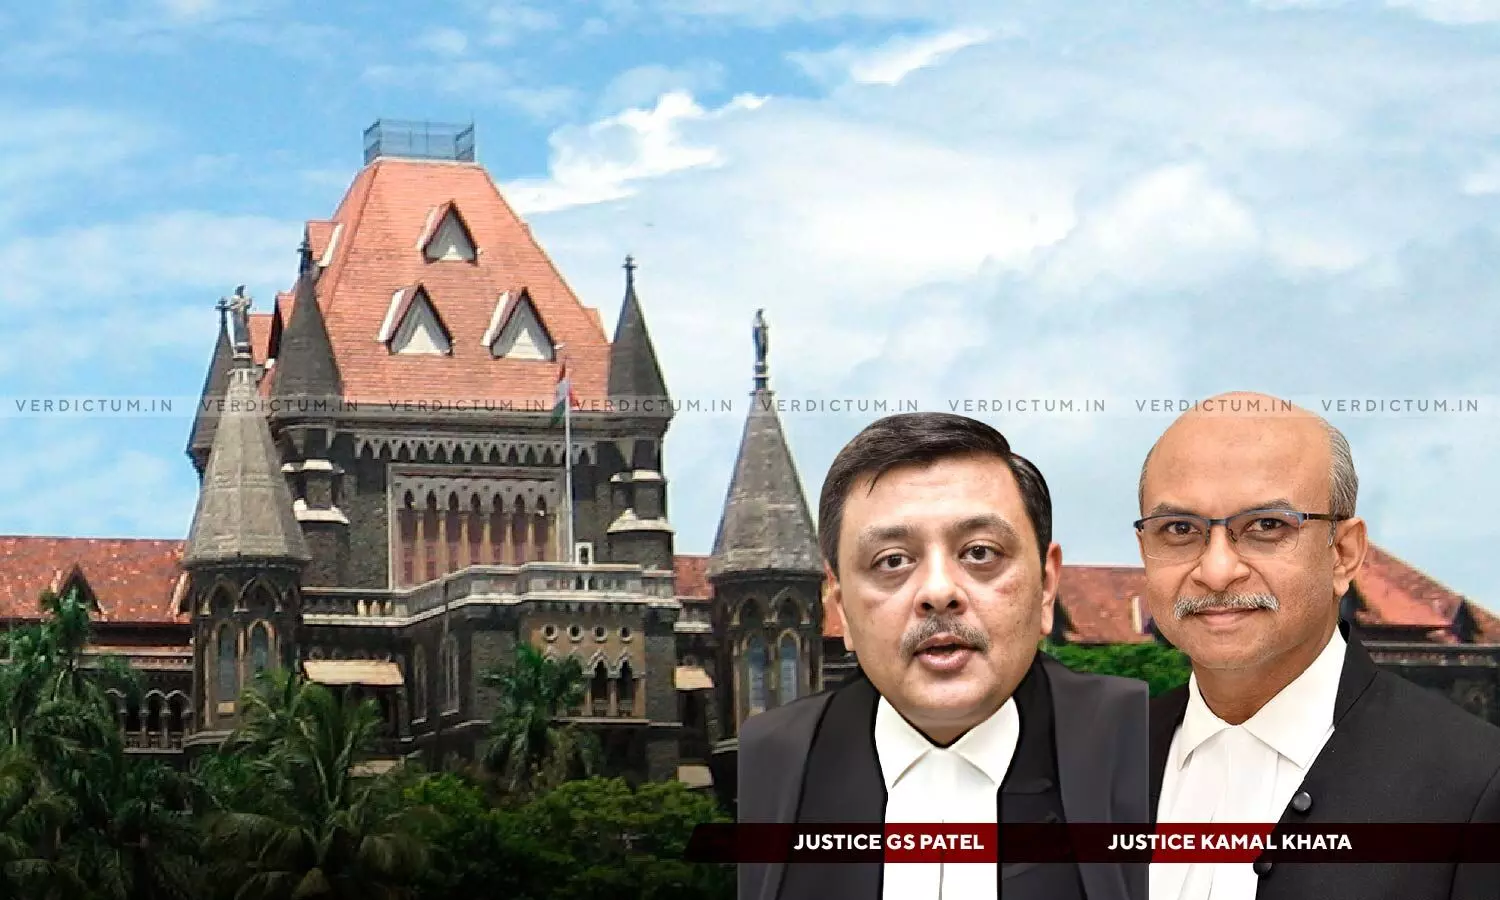 Keeping Constituency Unrepresented For Indefinite Period Wholly Unconstitutional: Bombay HC Directs ECI To Immediately Hold Bye-Election For Pune LS Seat